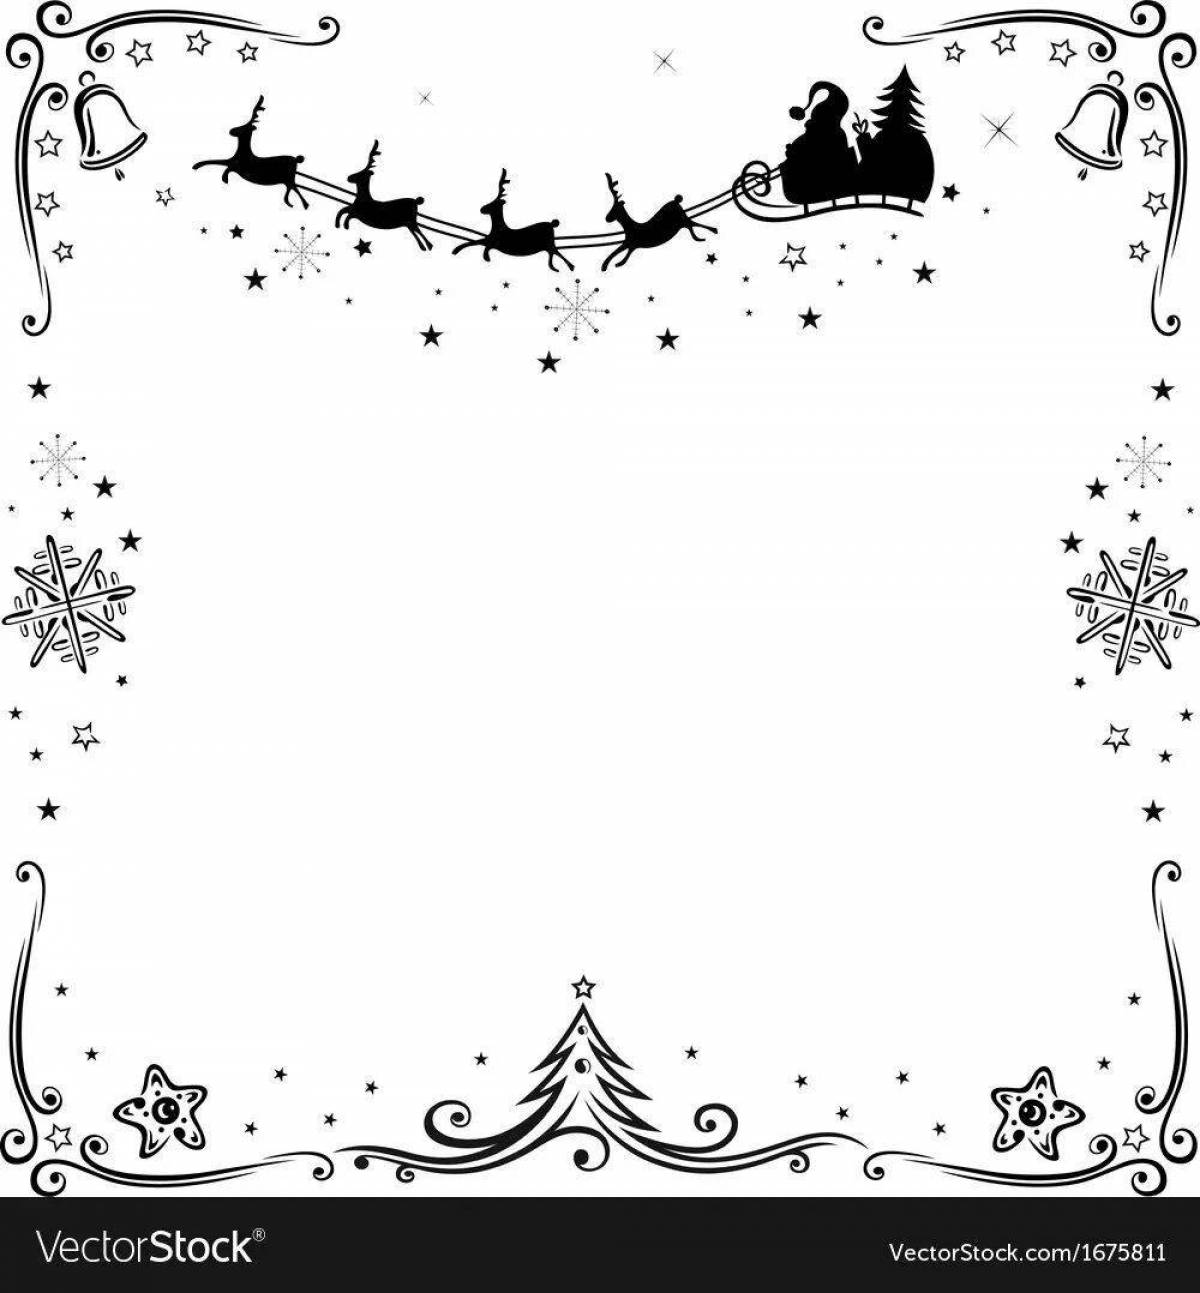 Colorful Christmas coloring frame